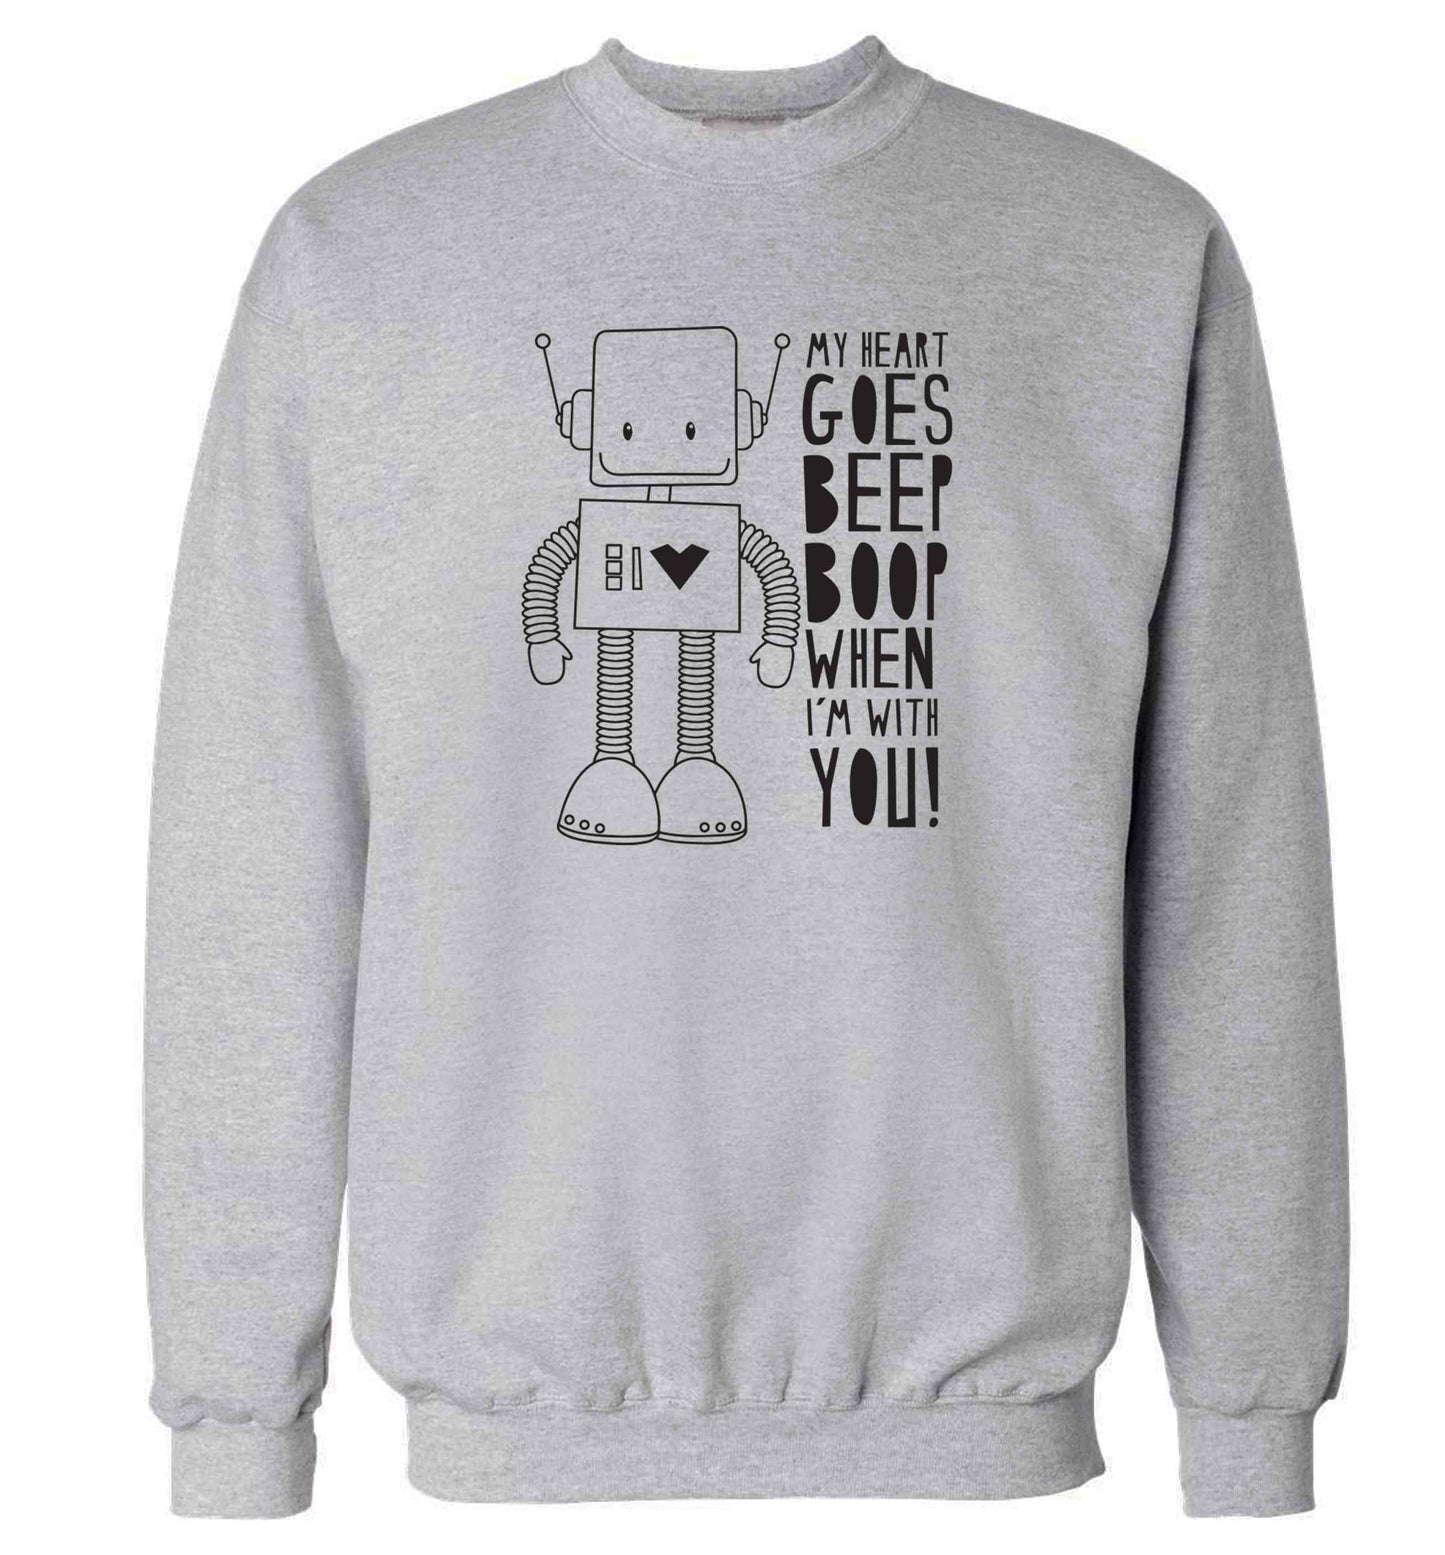 My heart goes beep boop when I'm with you adult's unisex grey sweater 2XL